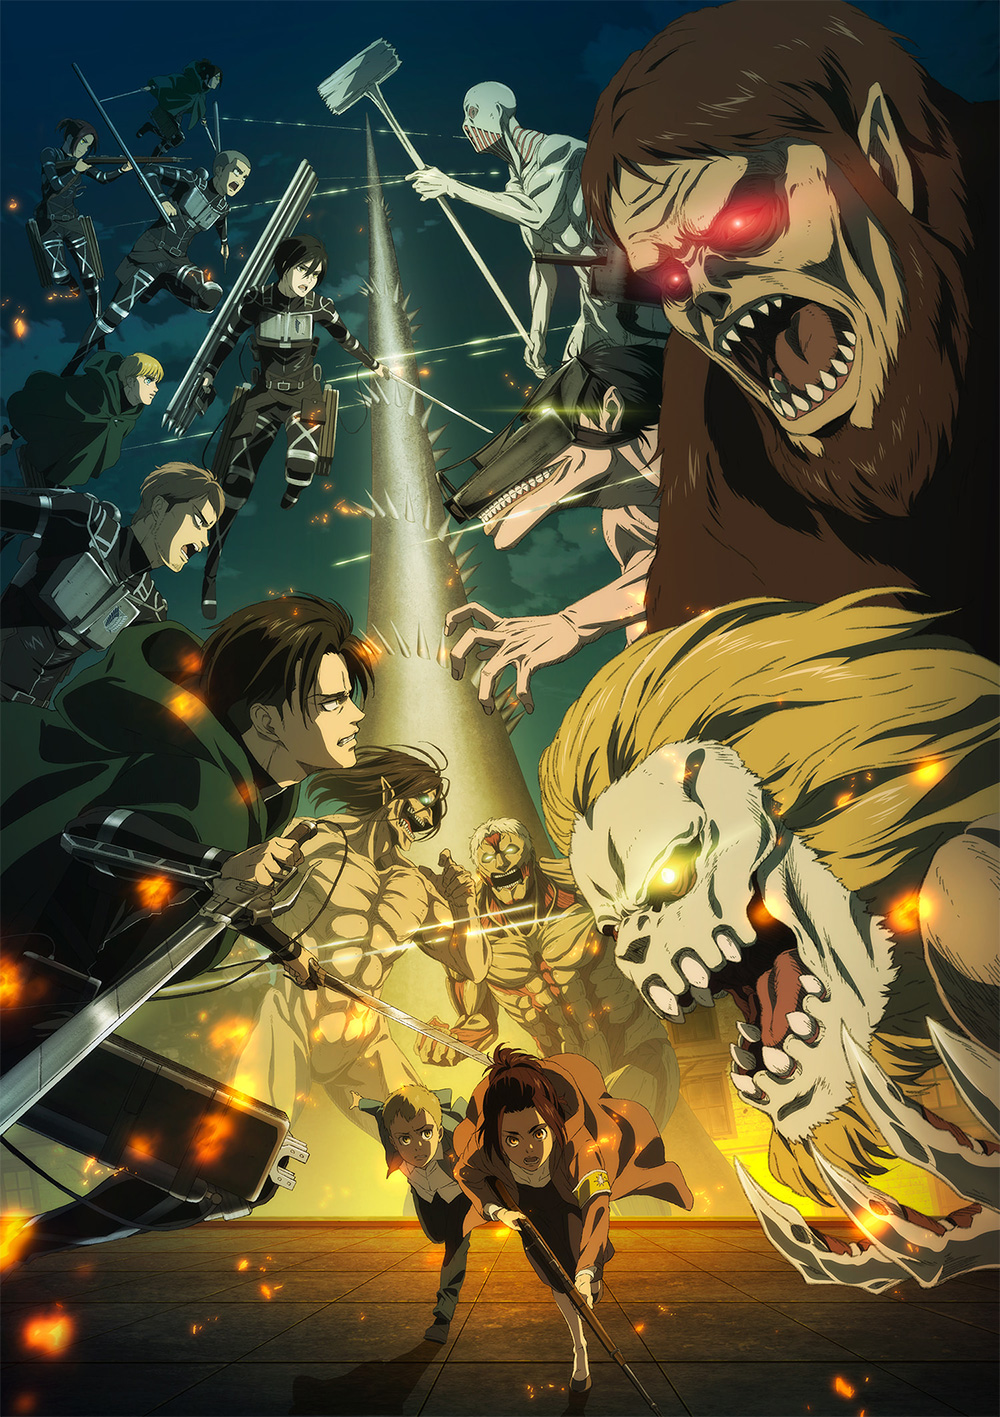 Attack on Titan Final Season Listed with 16 Episodes - Otaku Tale